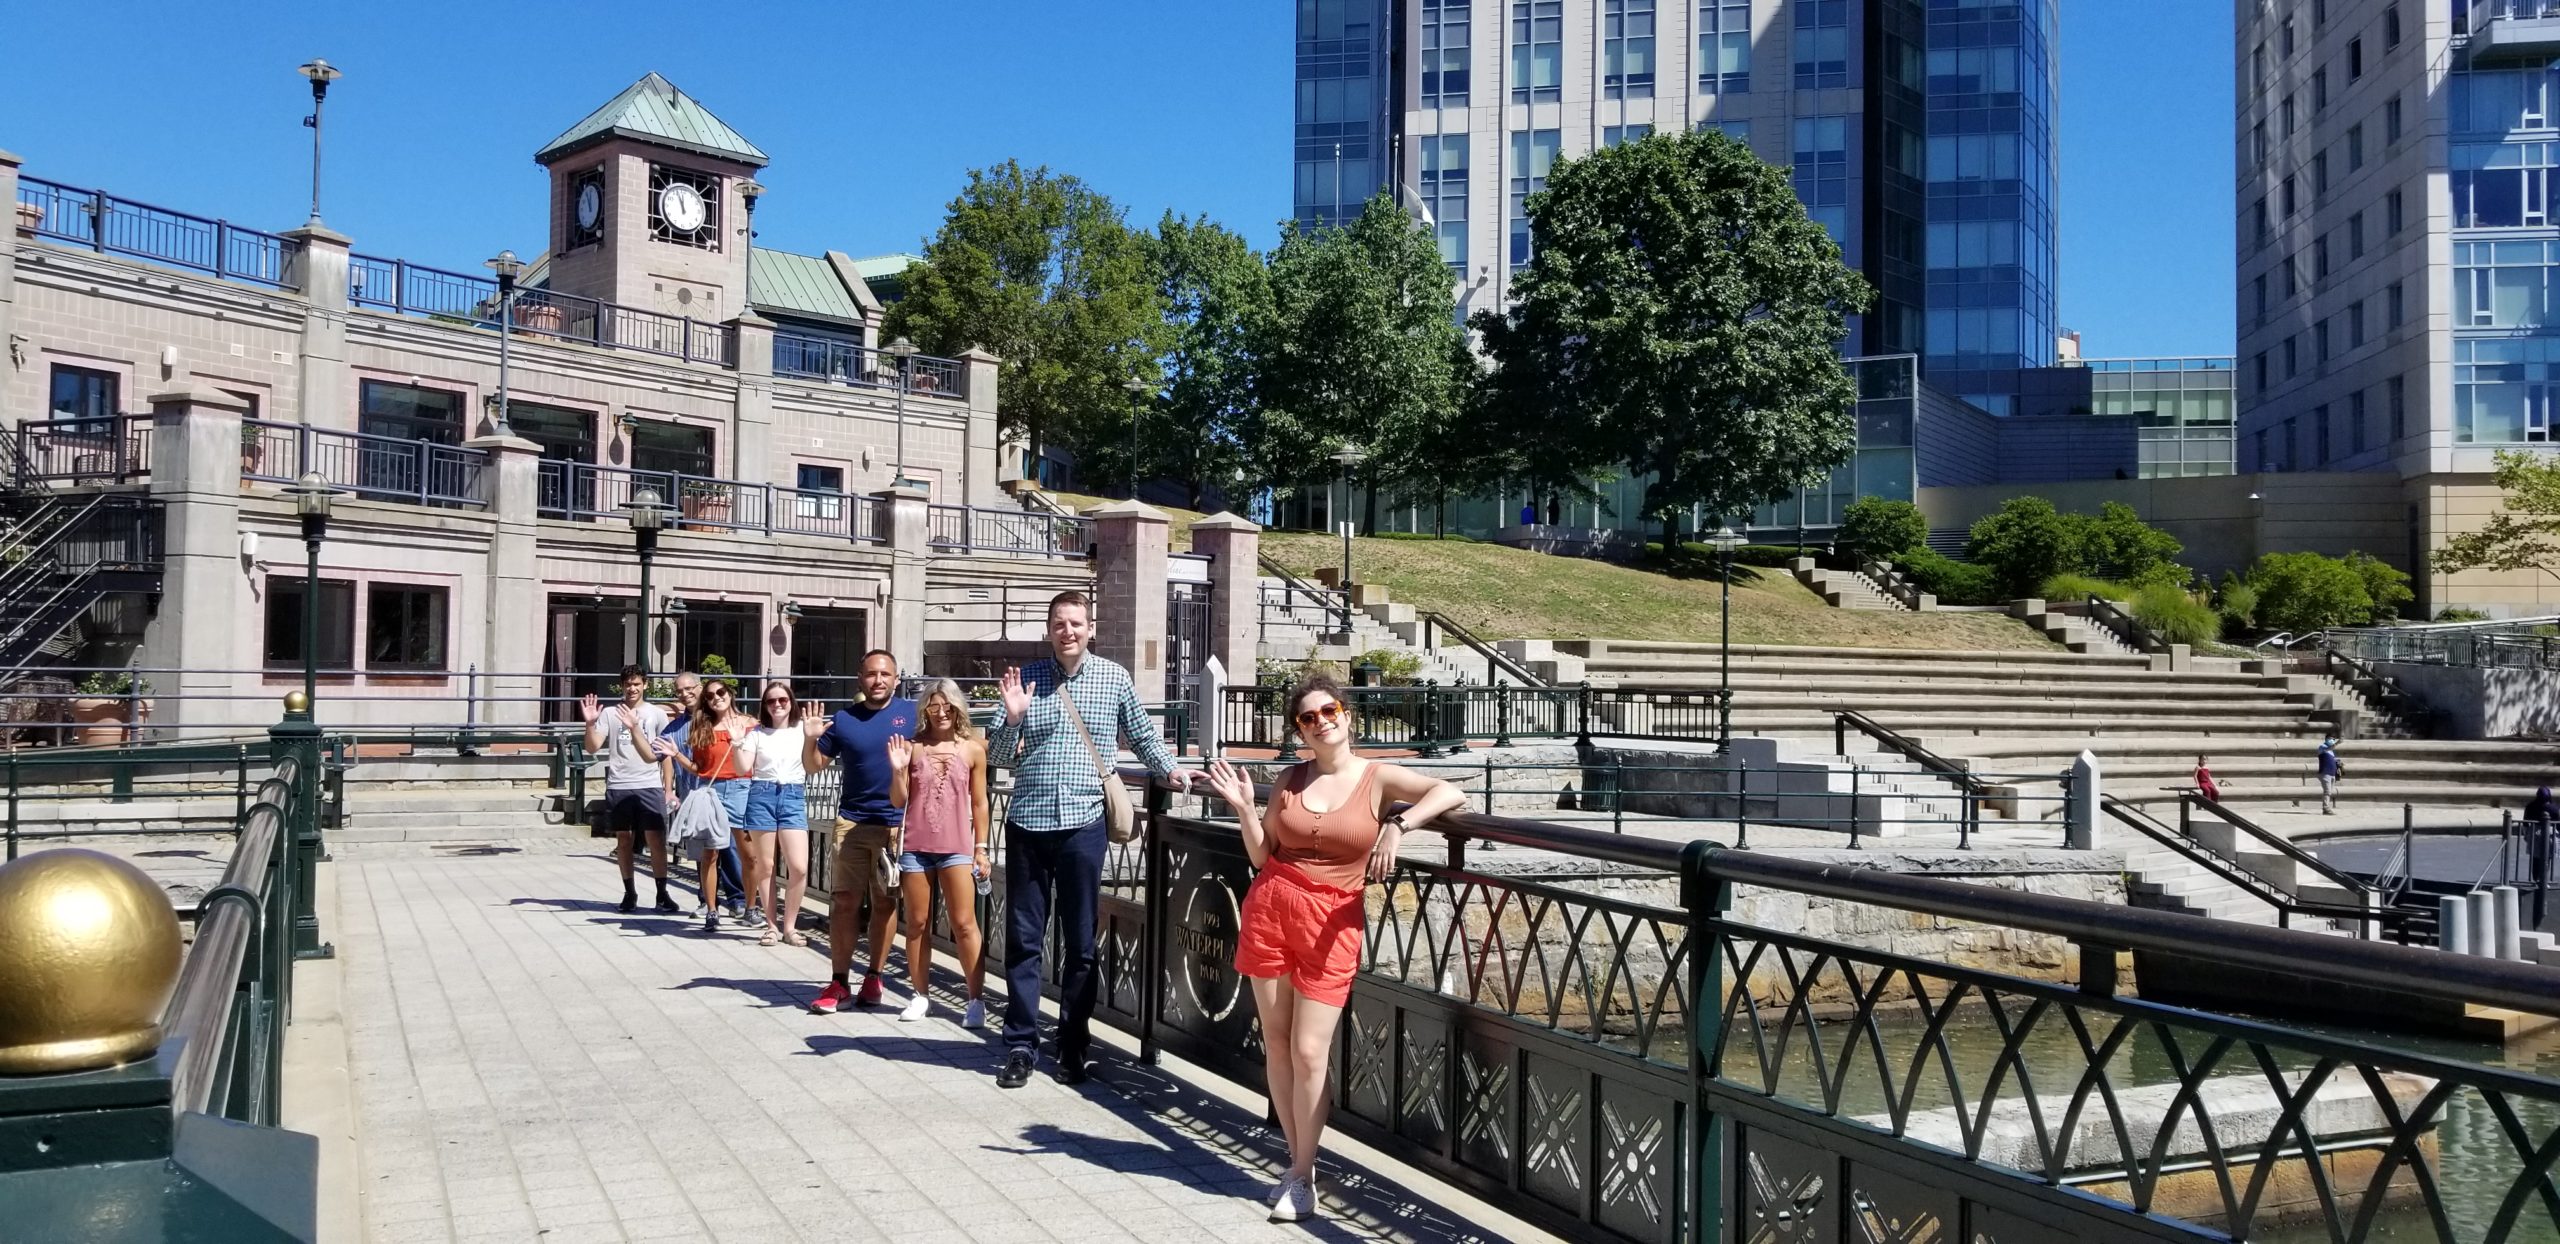 Group picture of tourists at the Providence Pedestrian Bridge - an experience included in the Providence Walking Tour.